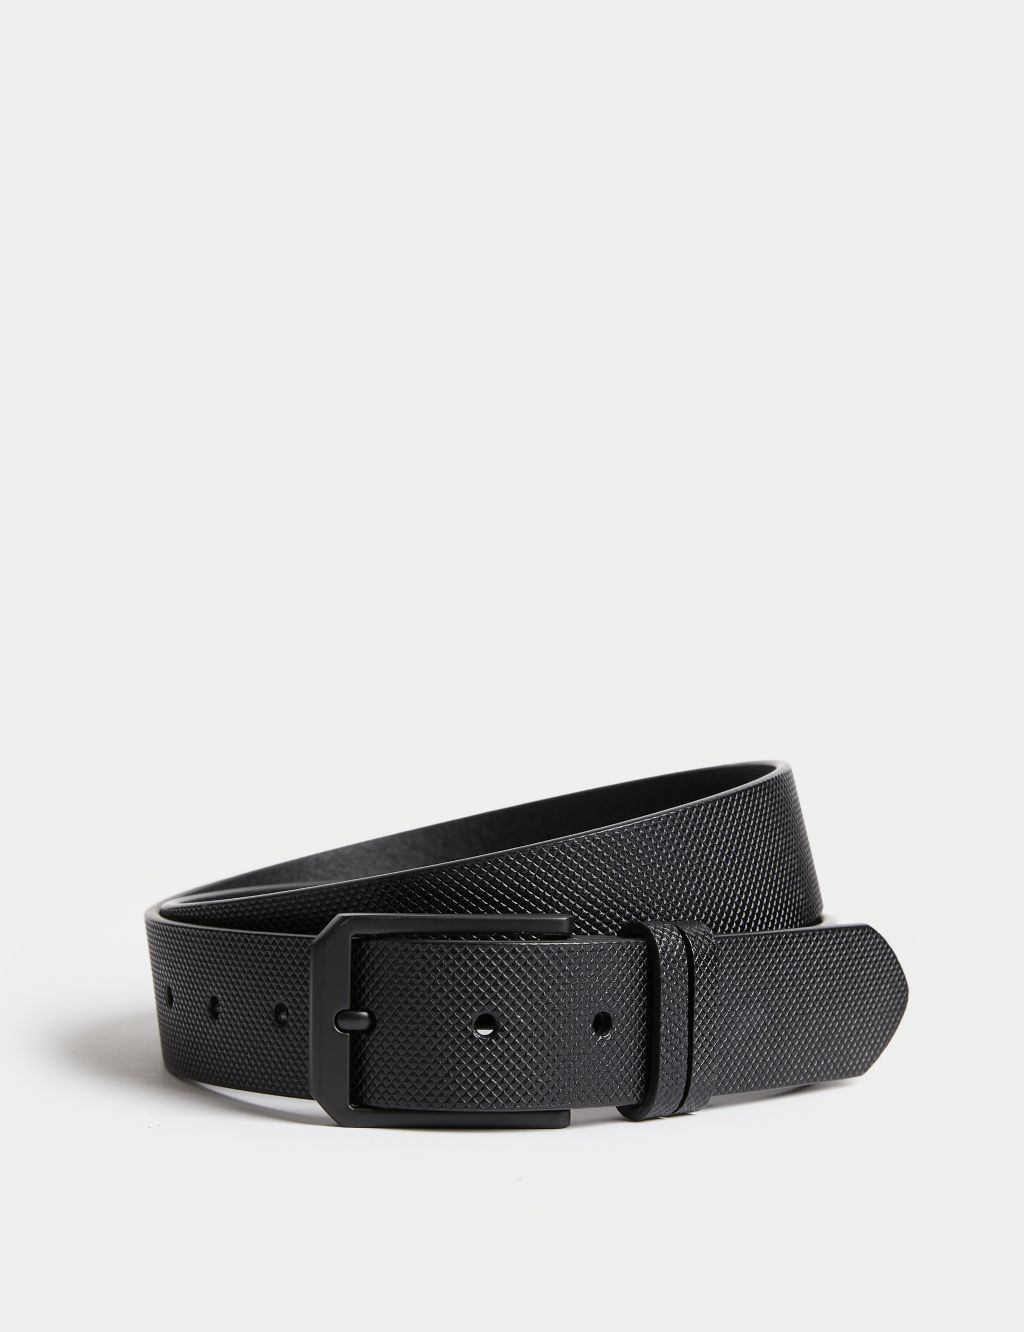 Buy Leather Textured Belt | M&S Collection | M&S